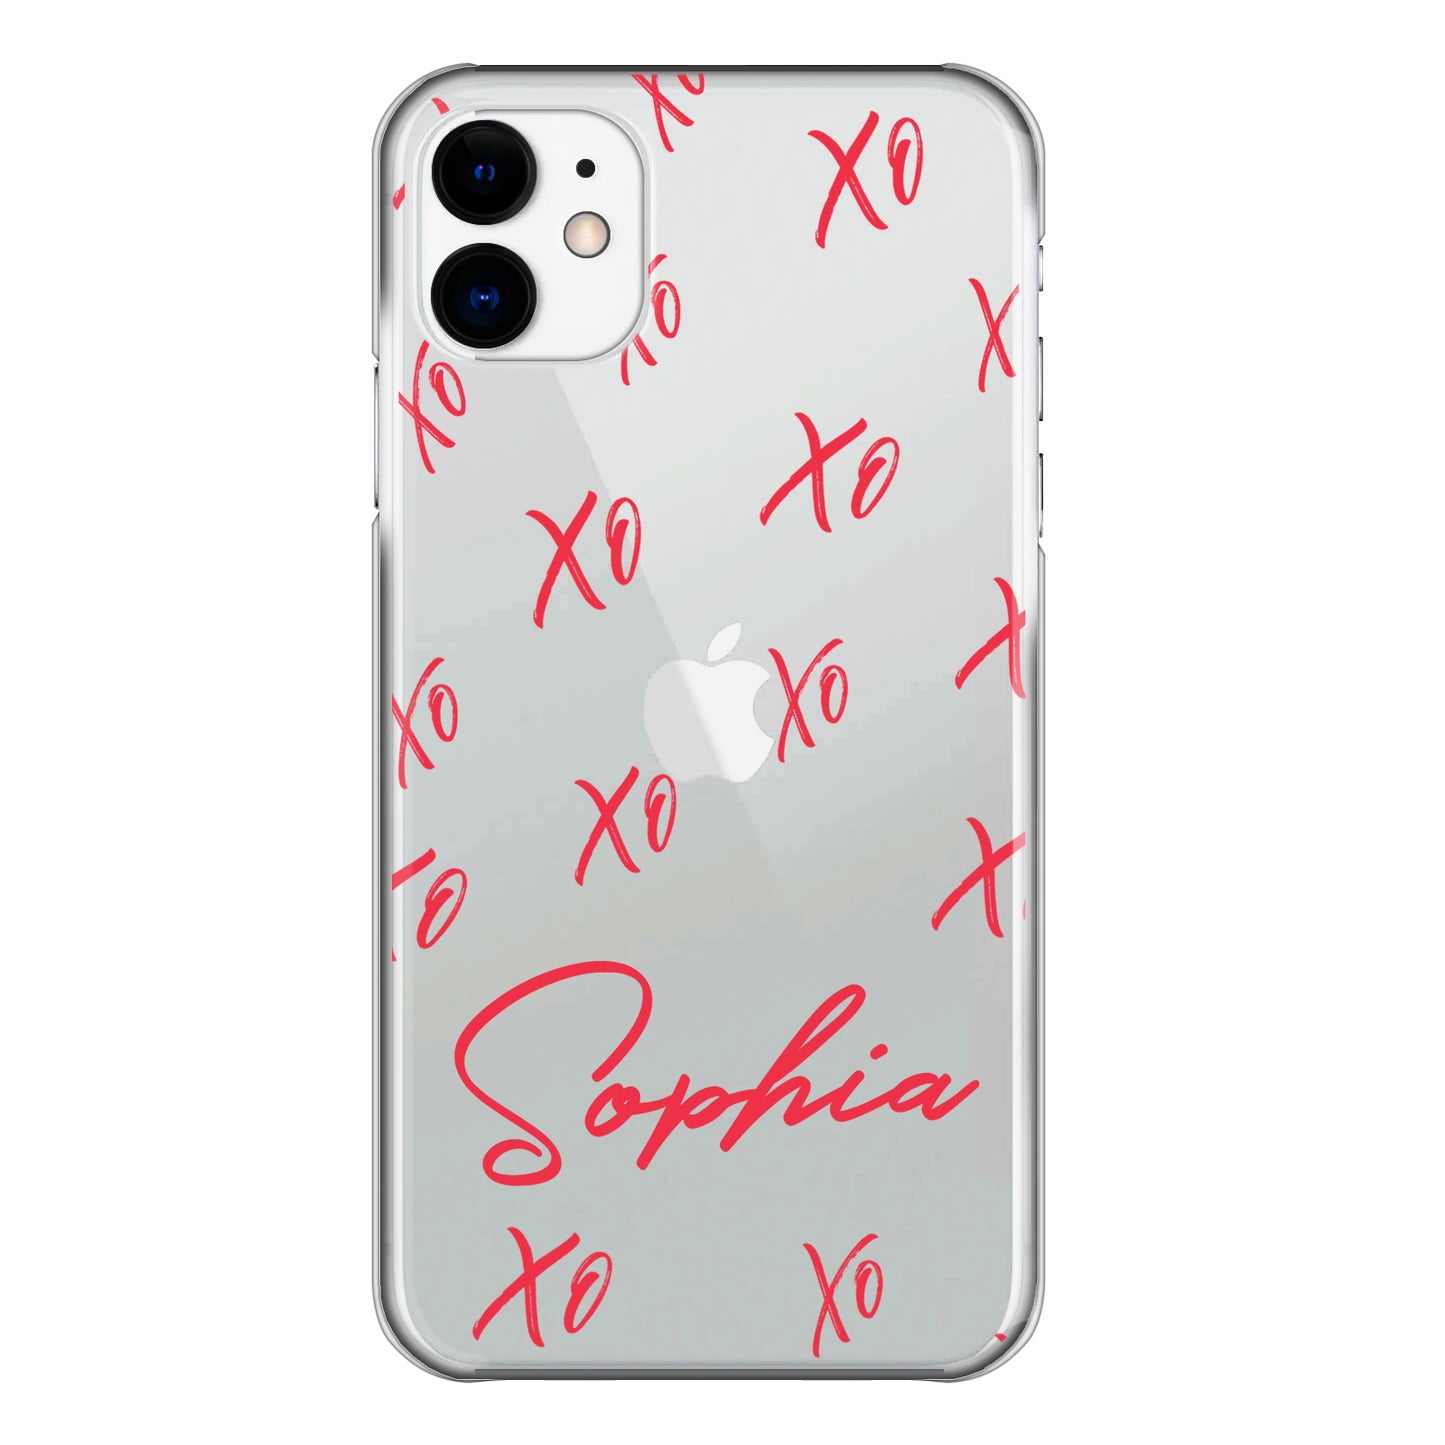 Personalised Nokia Phone Hard Case with Hugs/Kisses and Stylish Red Text